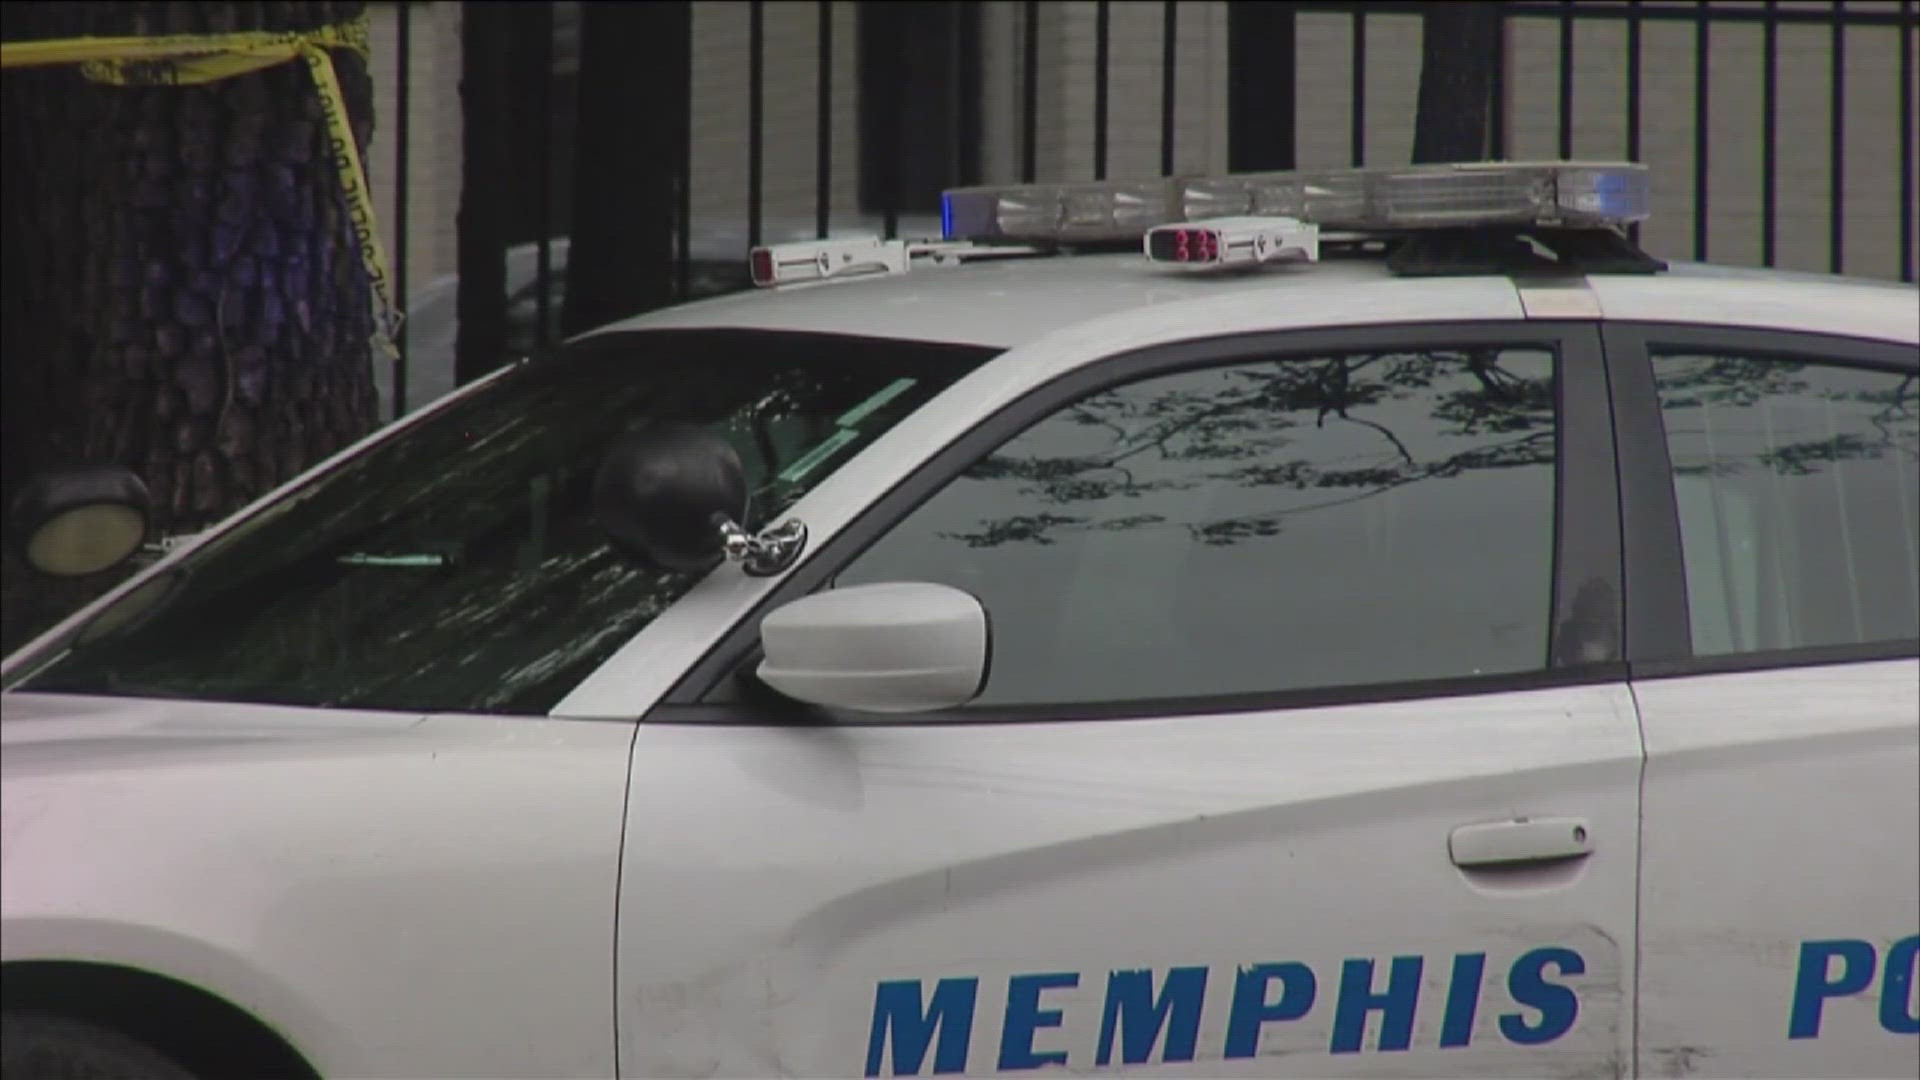 According to Crimestoppers, 192 people have been murdered in Memphis so far in 2023. They said they now will offer $4,000 for tips that identify murder suspects.